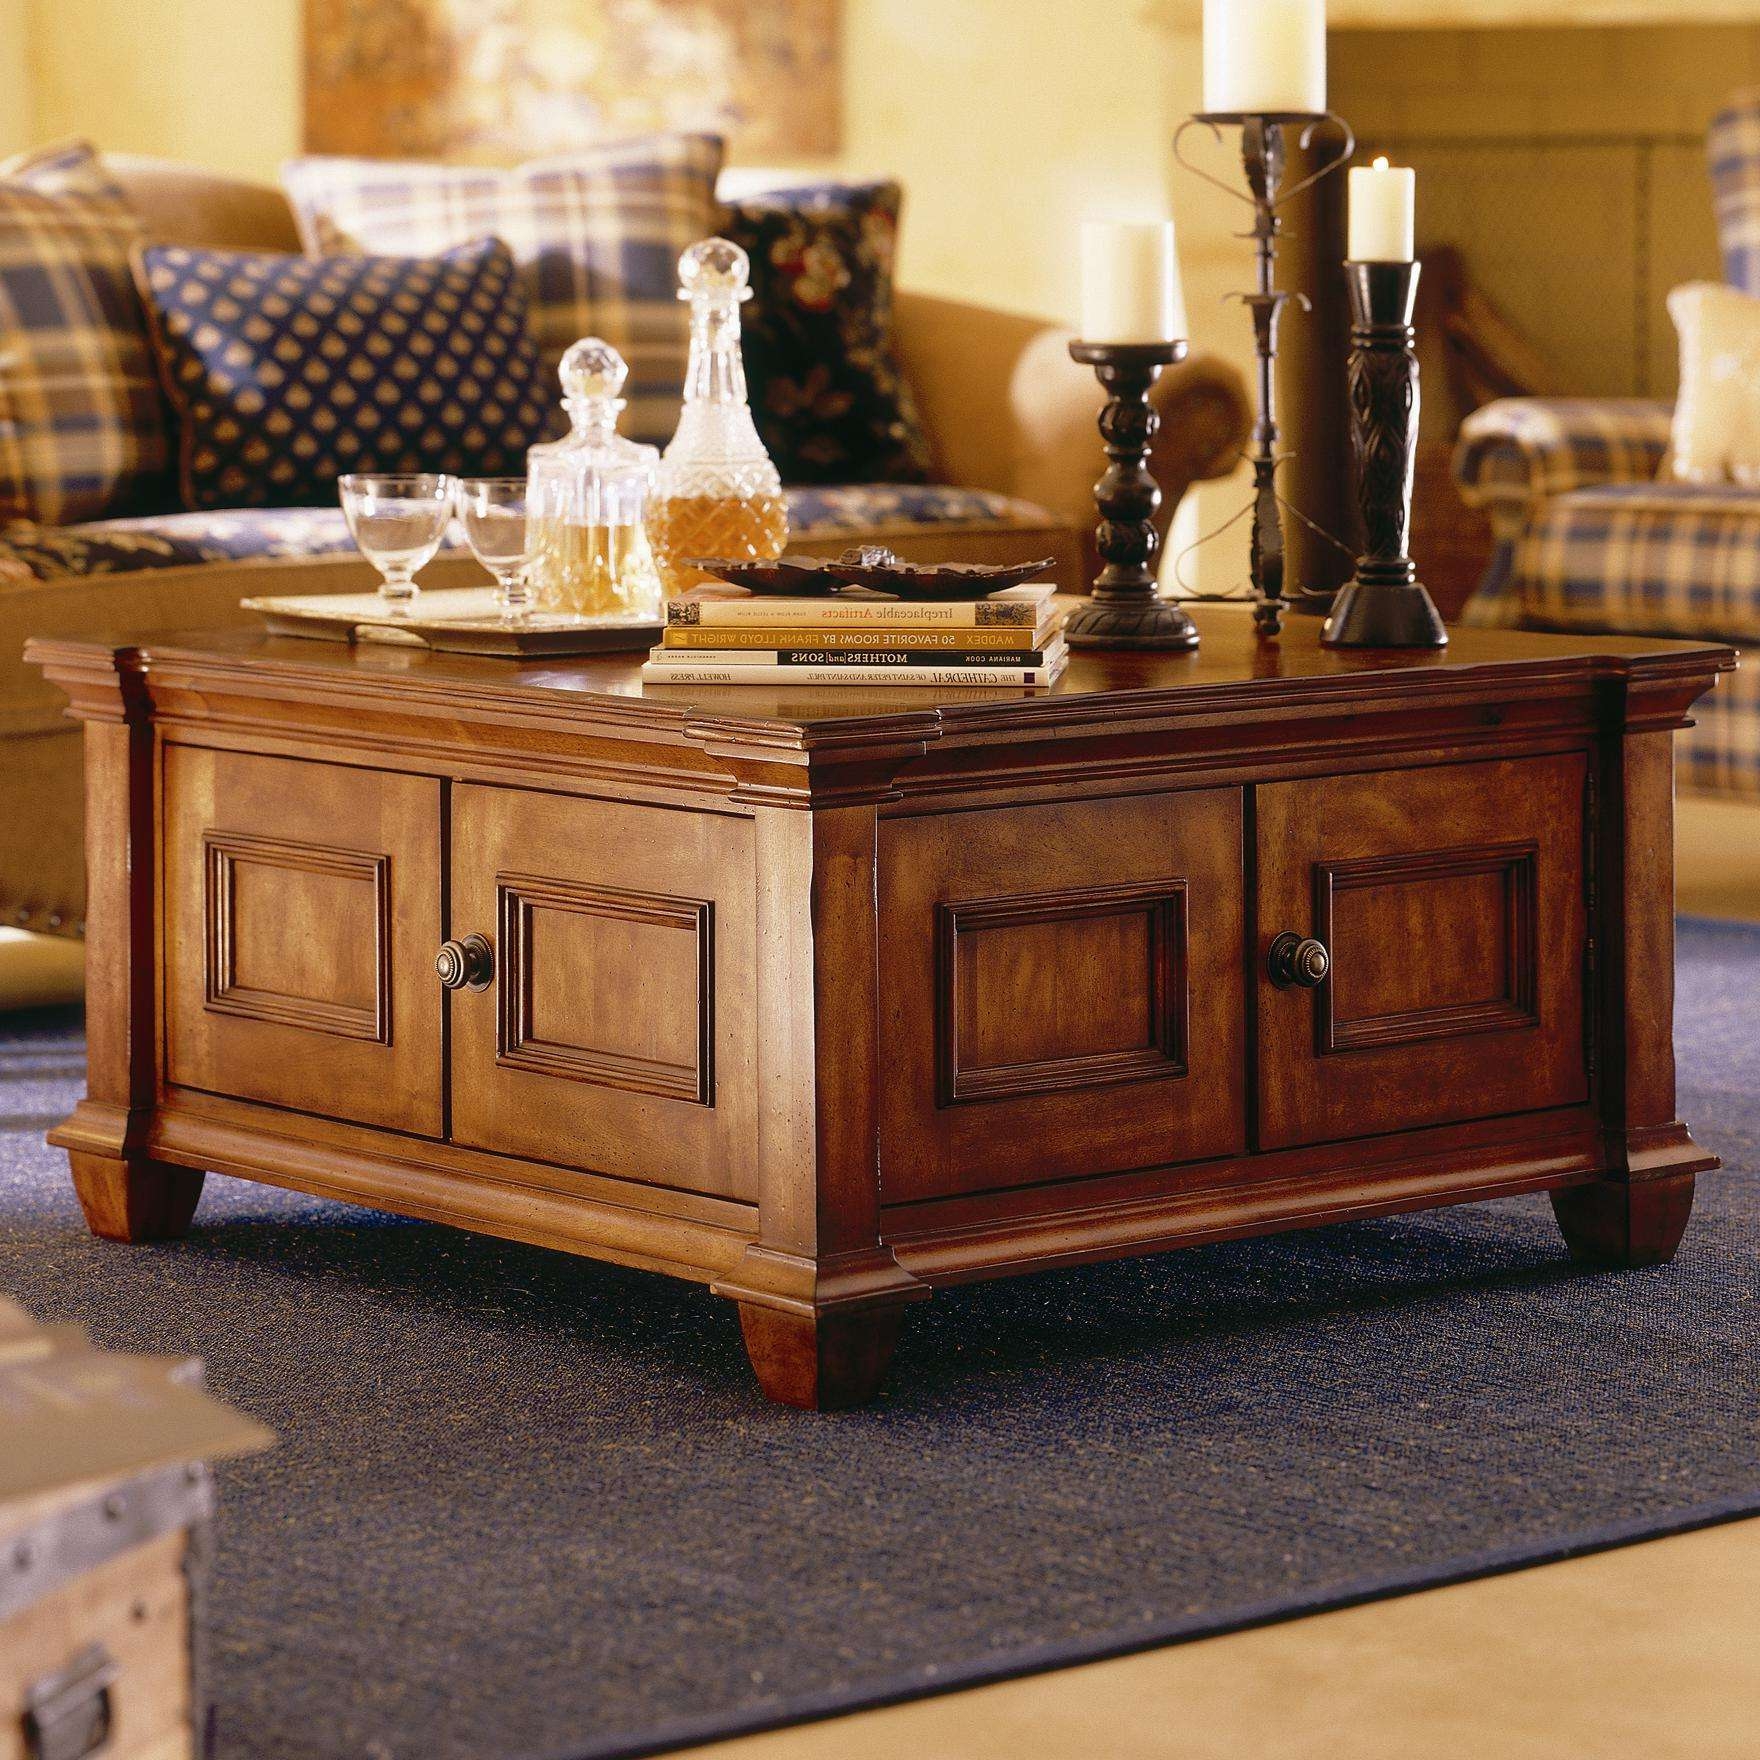 Round Coffee Table With Drawer Wine Storage Coffee Table Coffee Table With Drawers Uk  passeiorama.com